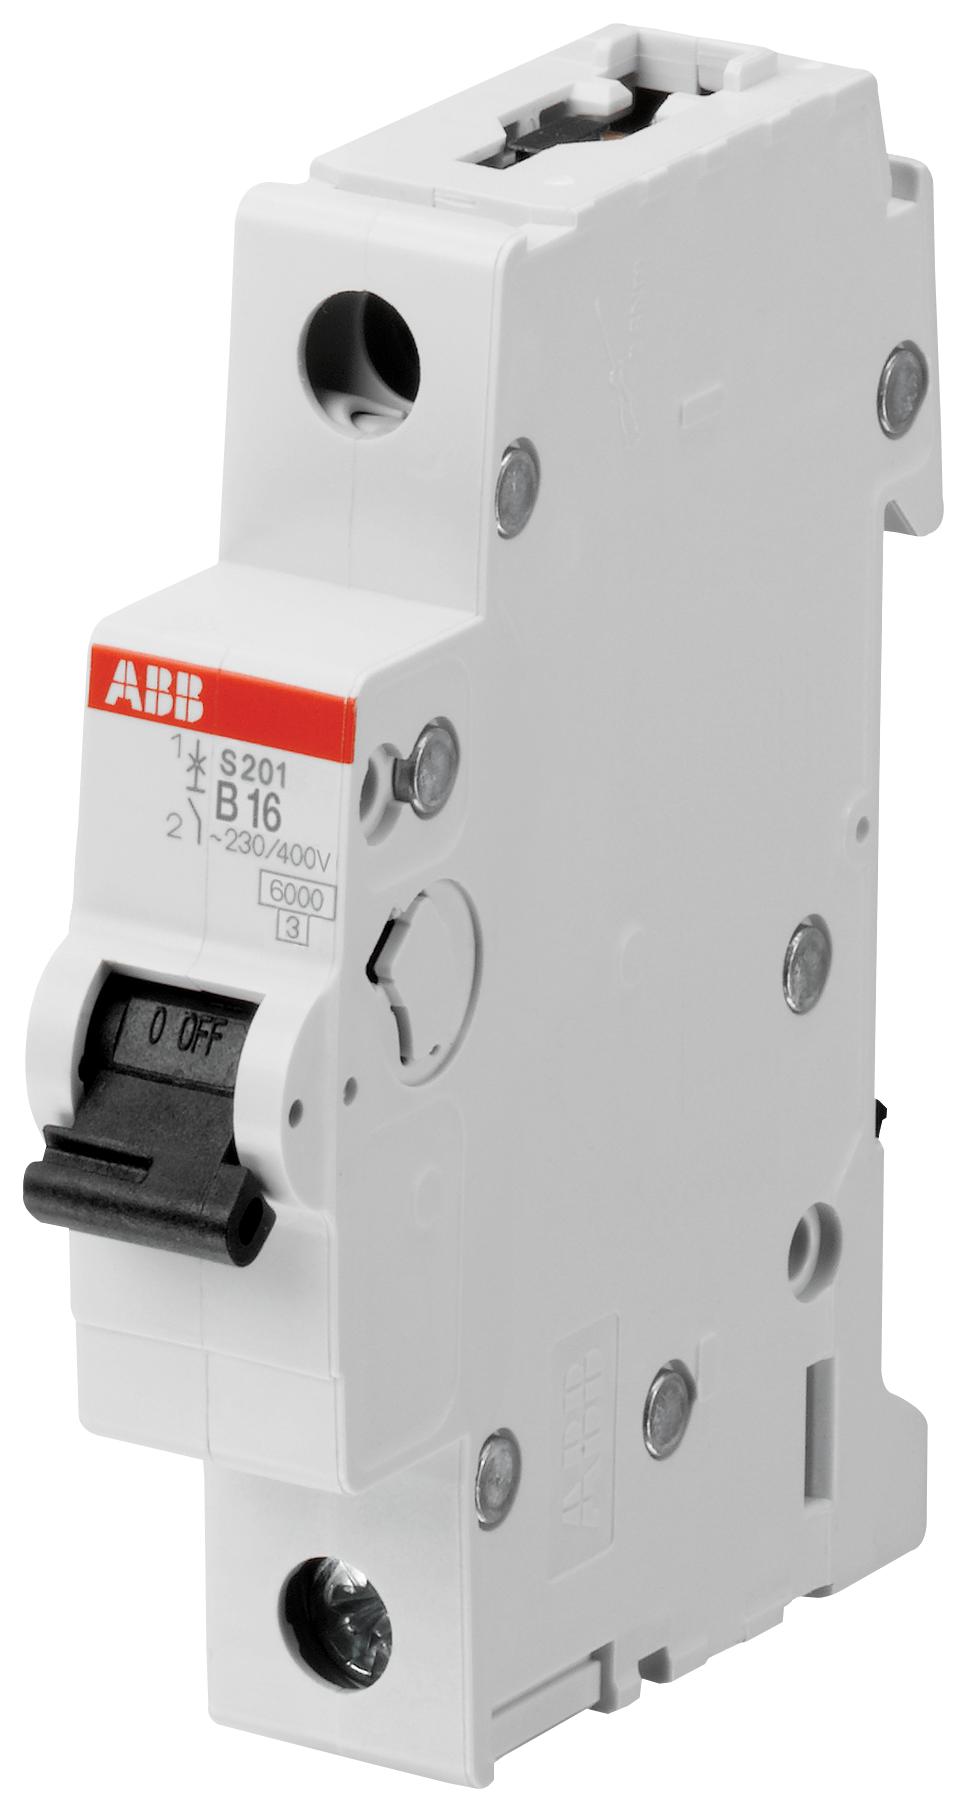 ABB Thermal Magnetic S201-D10 CIRCUIT BREAKER, THERMAL MAG, 1 POLE ABB 2492826 S201-D10